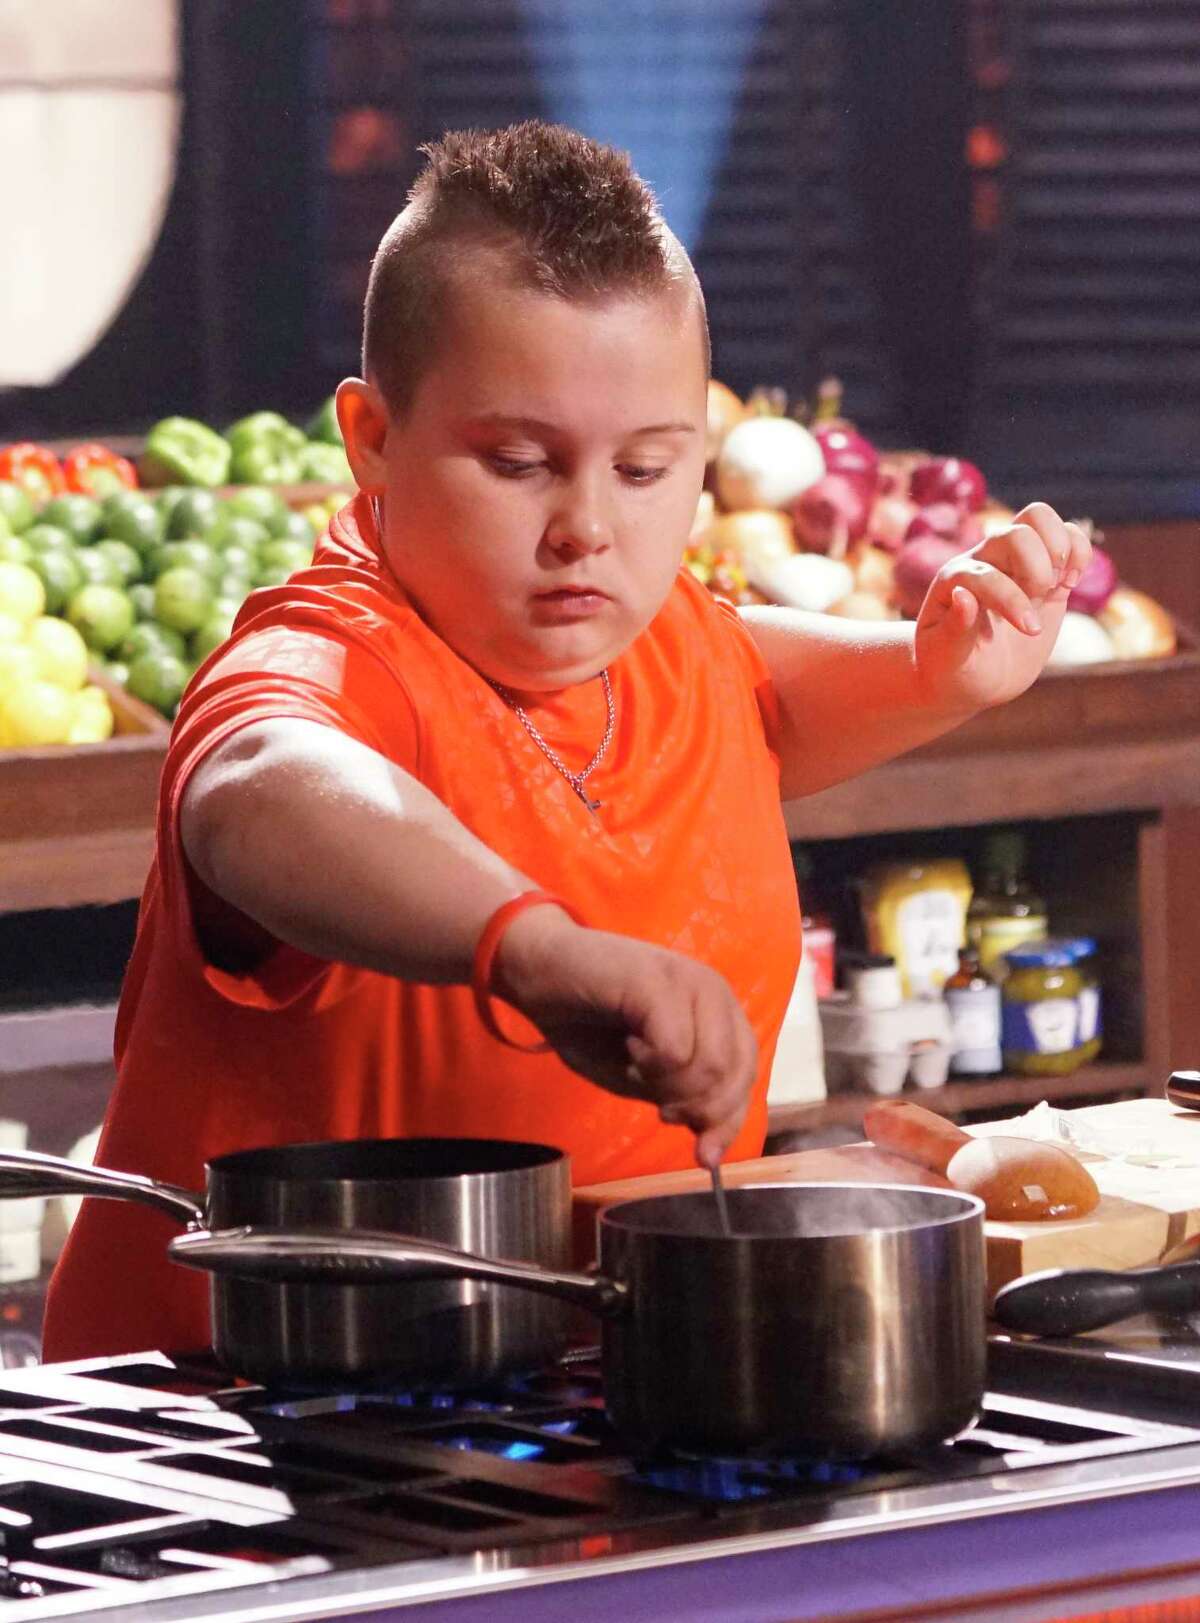 Shayne Wells has impressed hard-to-please Chef Gordon Ramsay and other celebrity taste-makers and has a good shot of advancing to "MasterChef Junior's" final three.